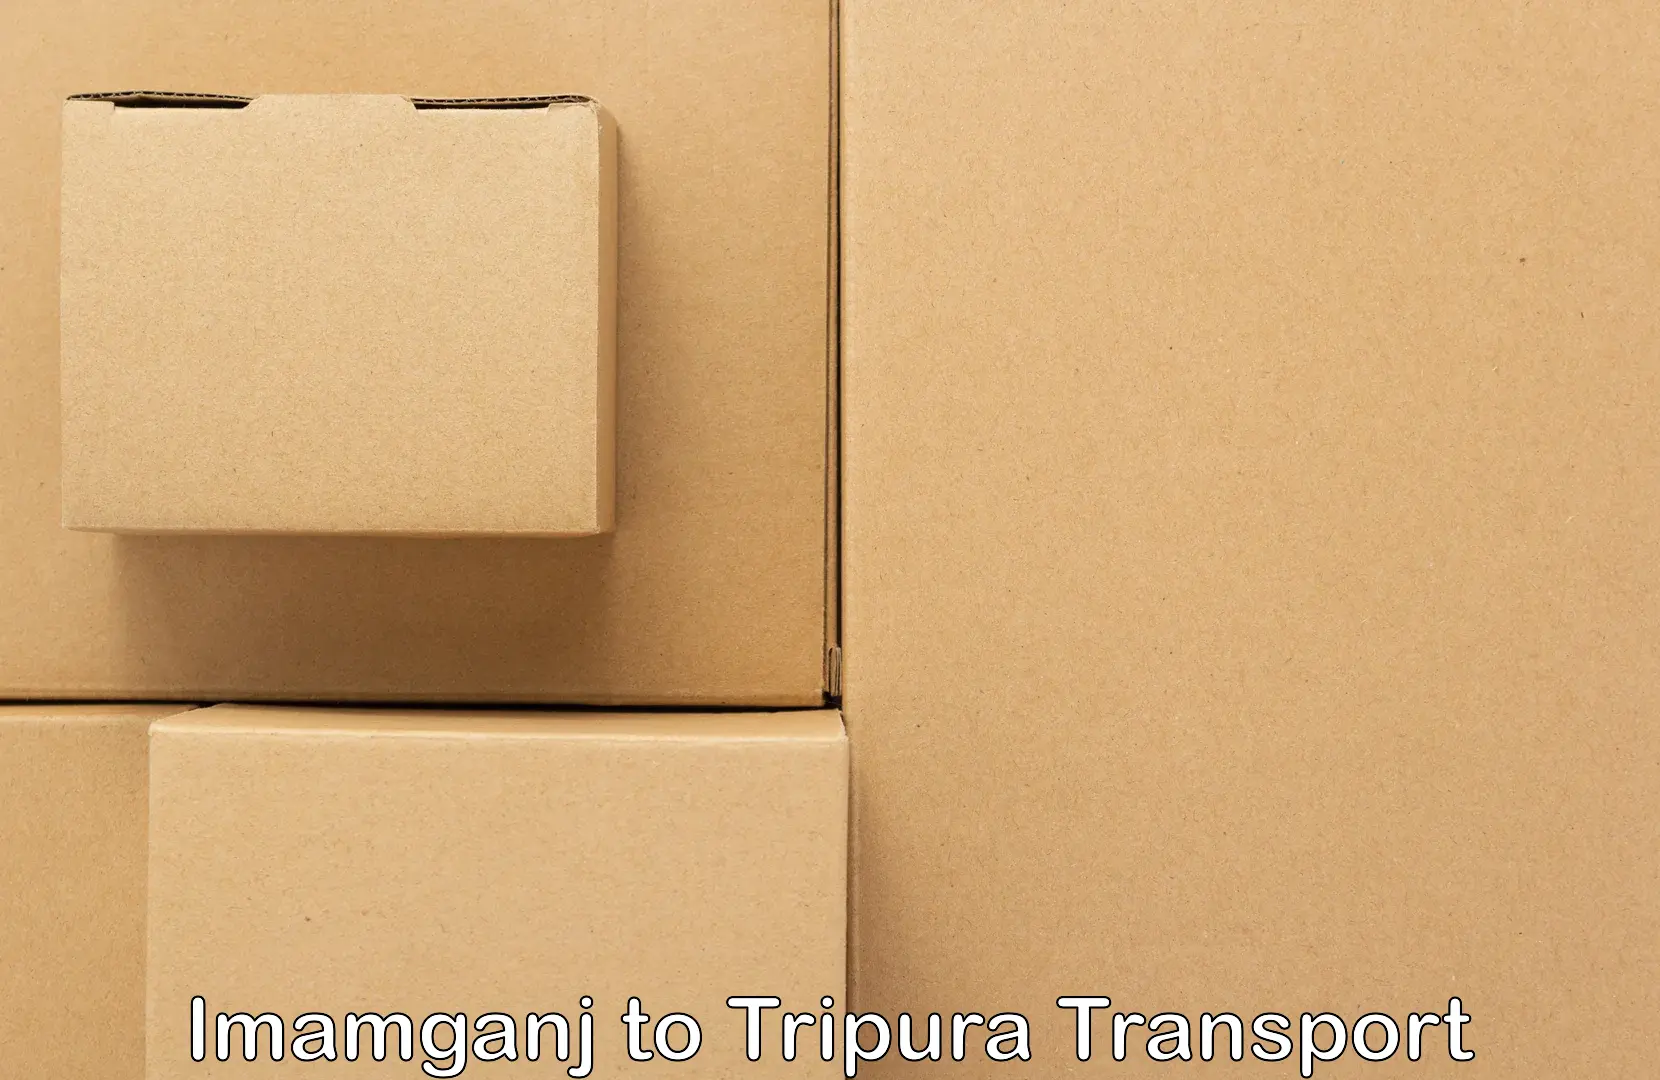 Air freight transport services Imamganj to Amarpur